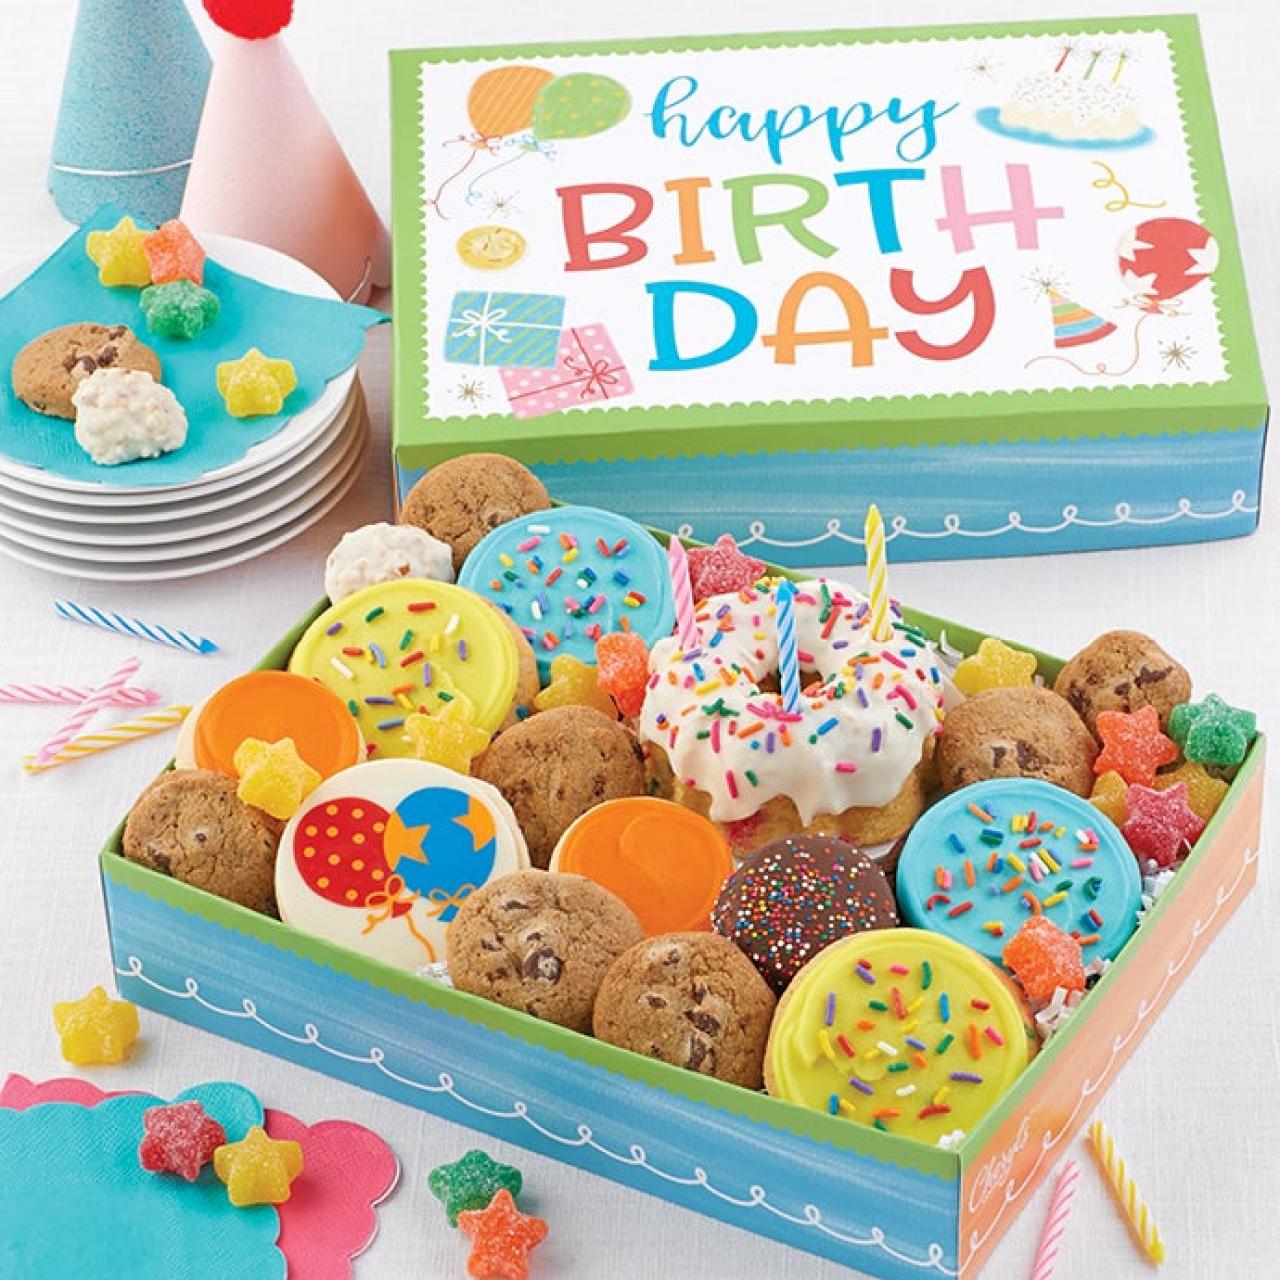 https://food.fnr.sndimg.com/content/dam/images/food/products/2022/2/7/rx_cheryls-cookies-happy-birthday-party-in-a-box.jpeg.rend.hgtvcom.1280.1280.suffix/1644255515440.jpeg